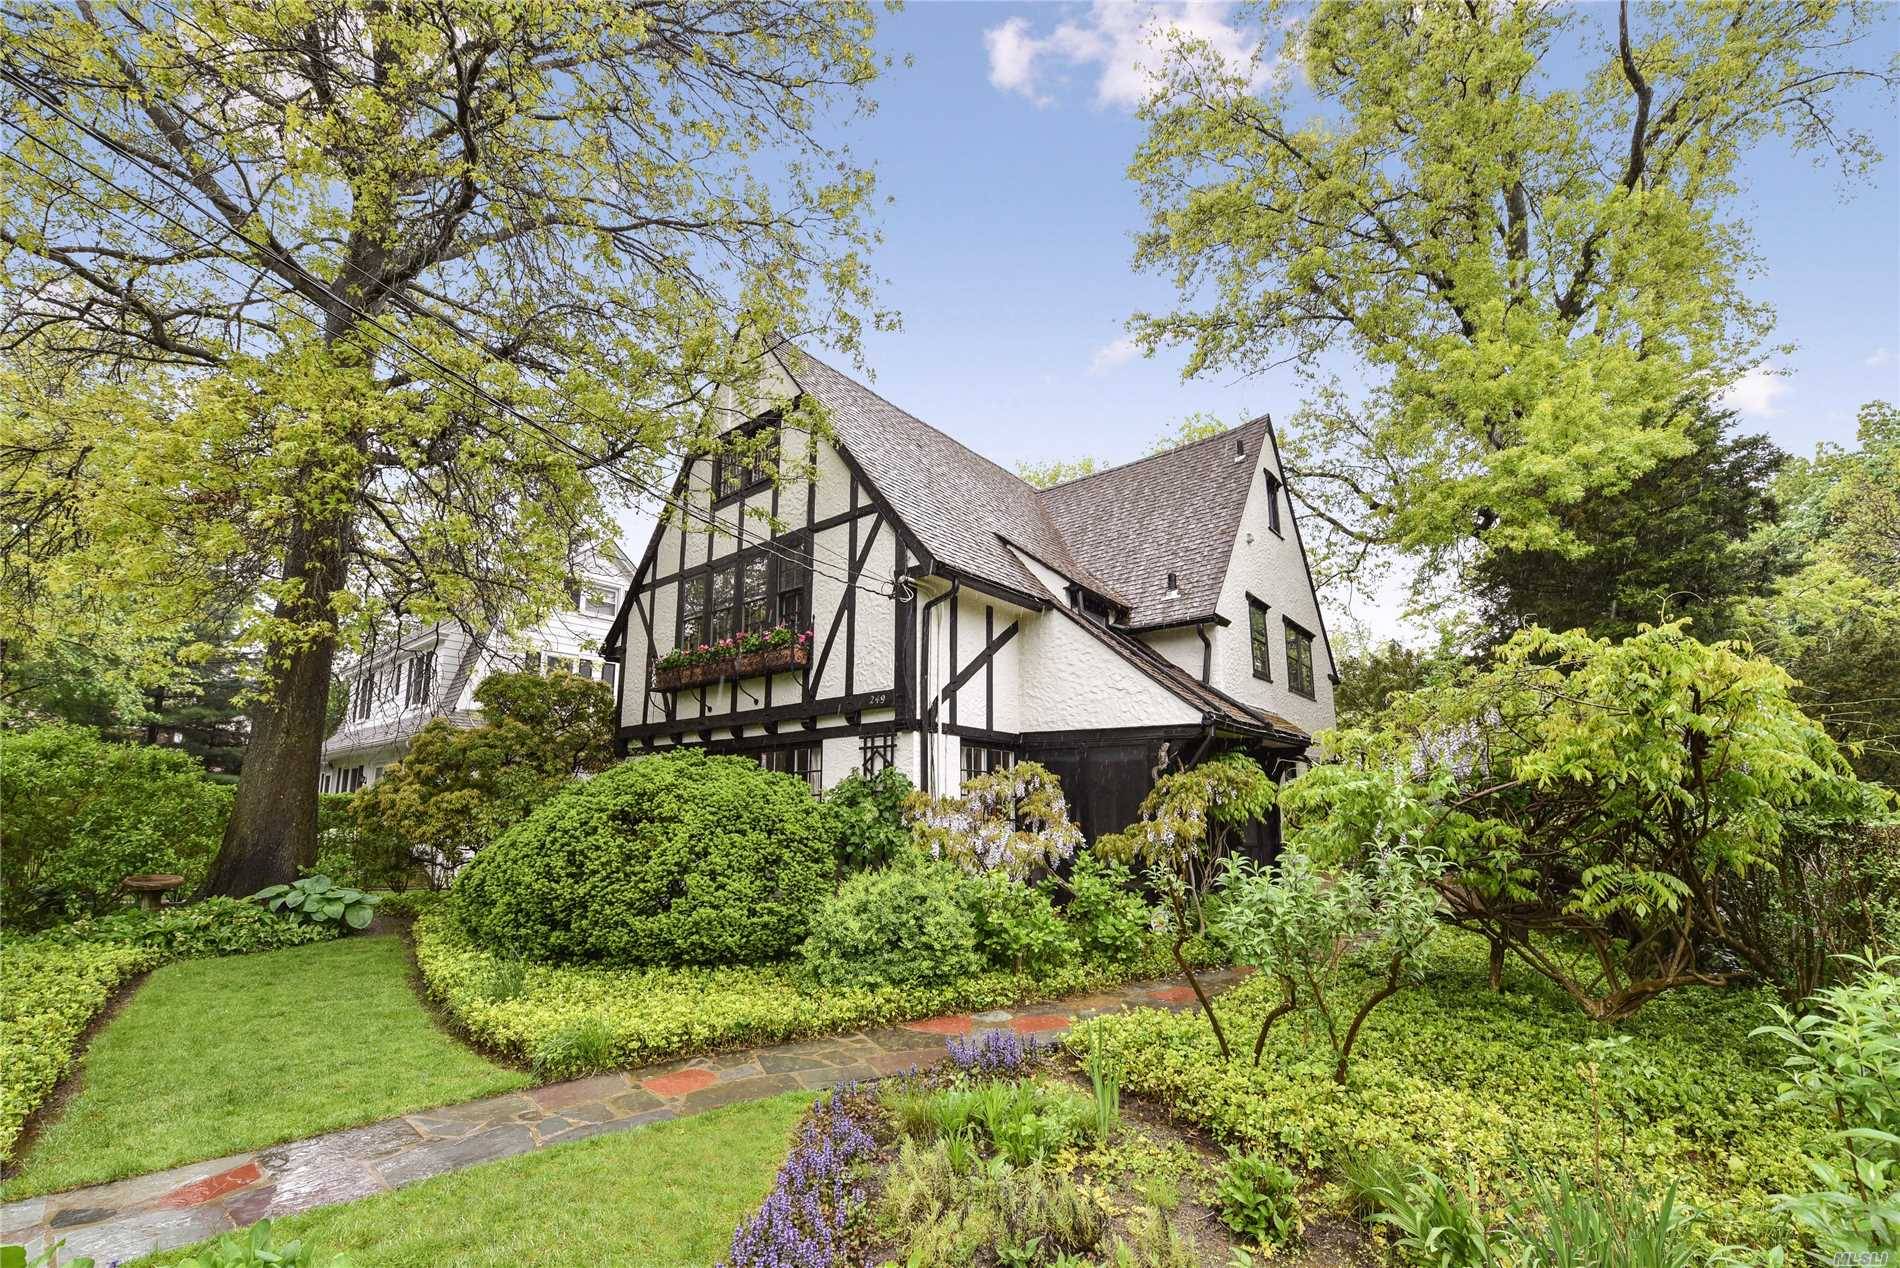 Renovated authentic 5 bedroom Tudor situated in Douglas Manor, one block from the Douglaston Club, two blocks from the shore and marina, and in close proximity to transportation and shopping.